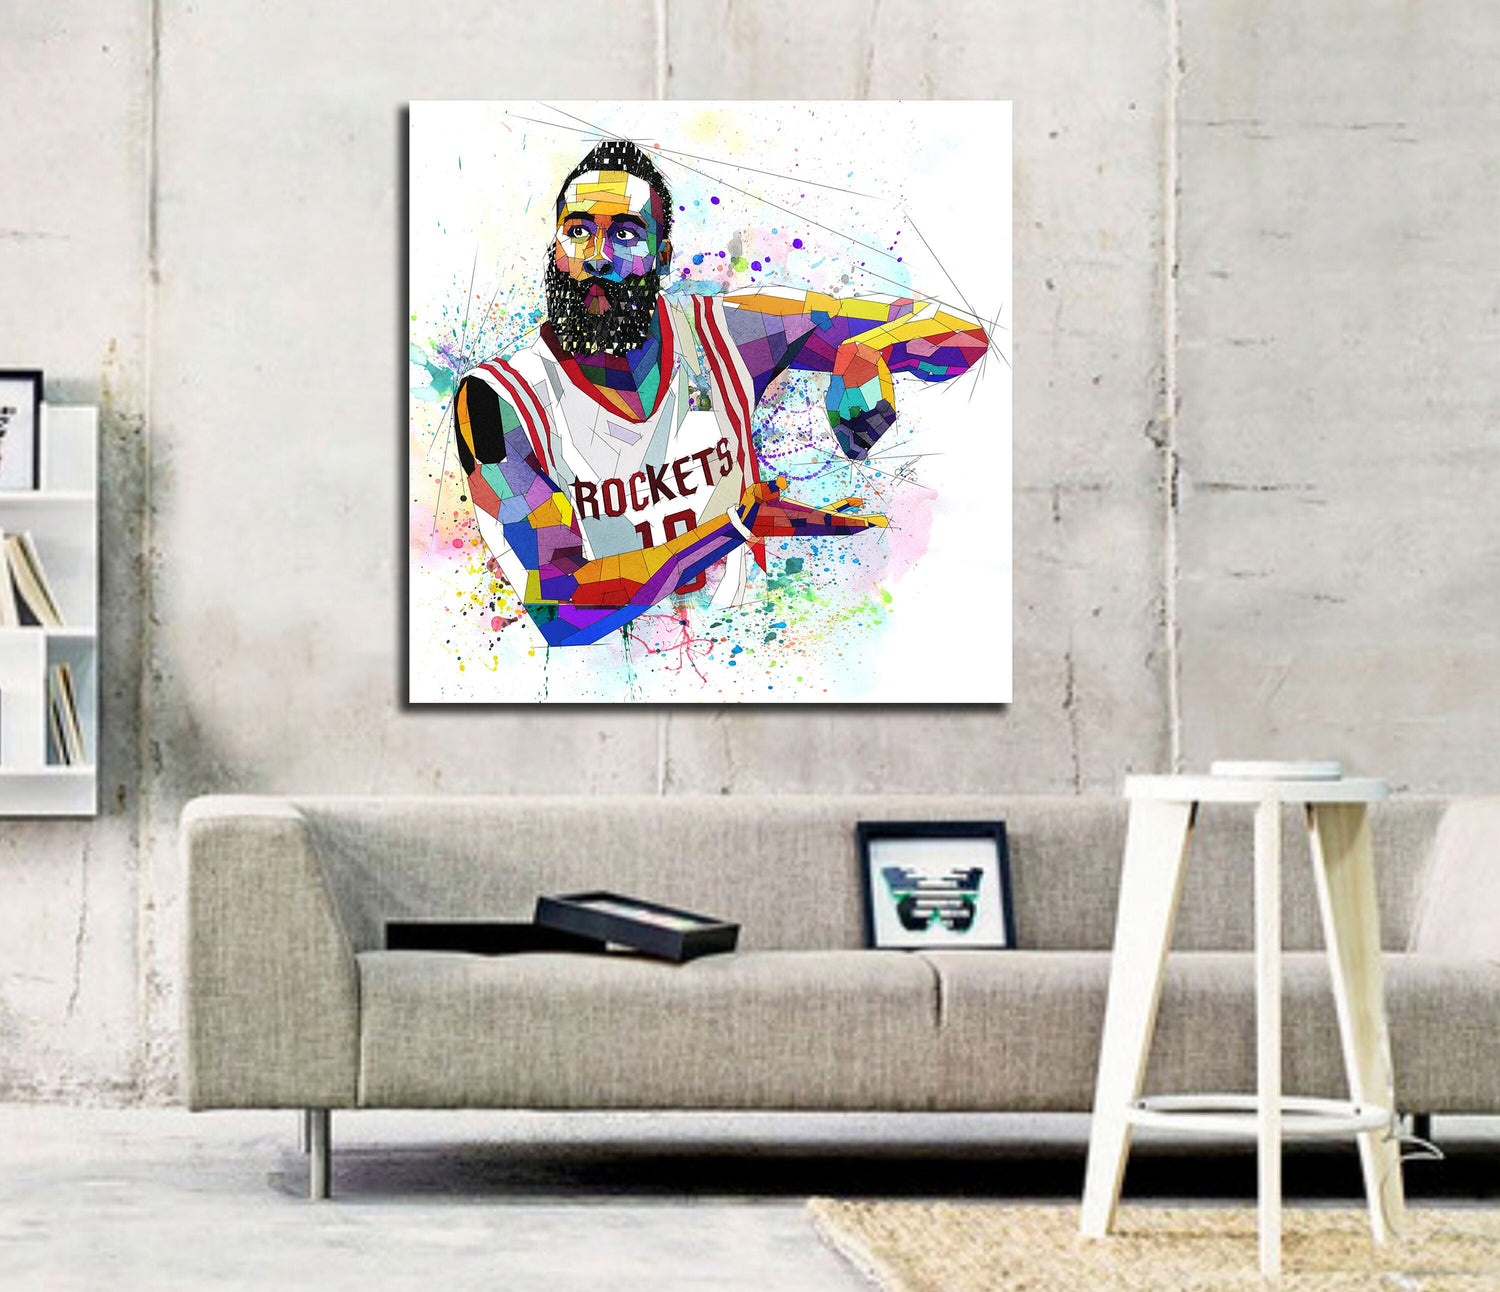  STAINA Poster Basketball Player James Harden Picture(162)  Canvas Art Poster And Wall Art Picture Print Modern Family Bedroom Decor  Posters 20x30inch(50x75cm): Posters & Prints